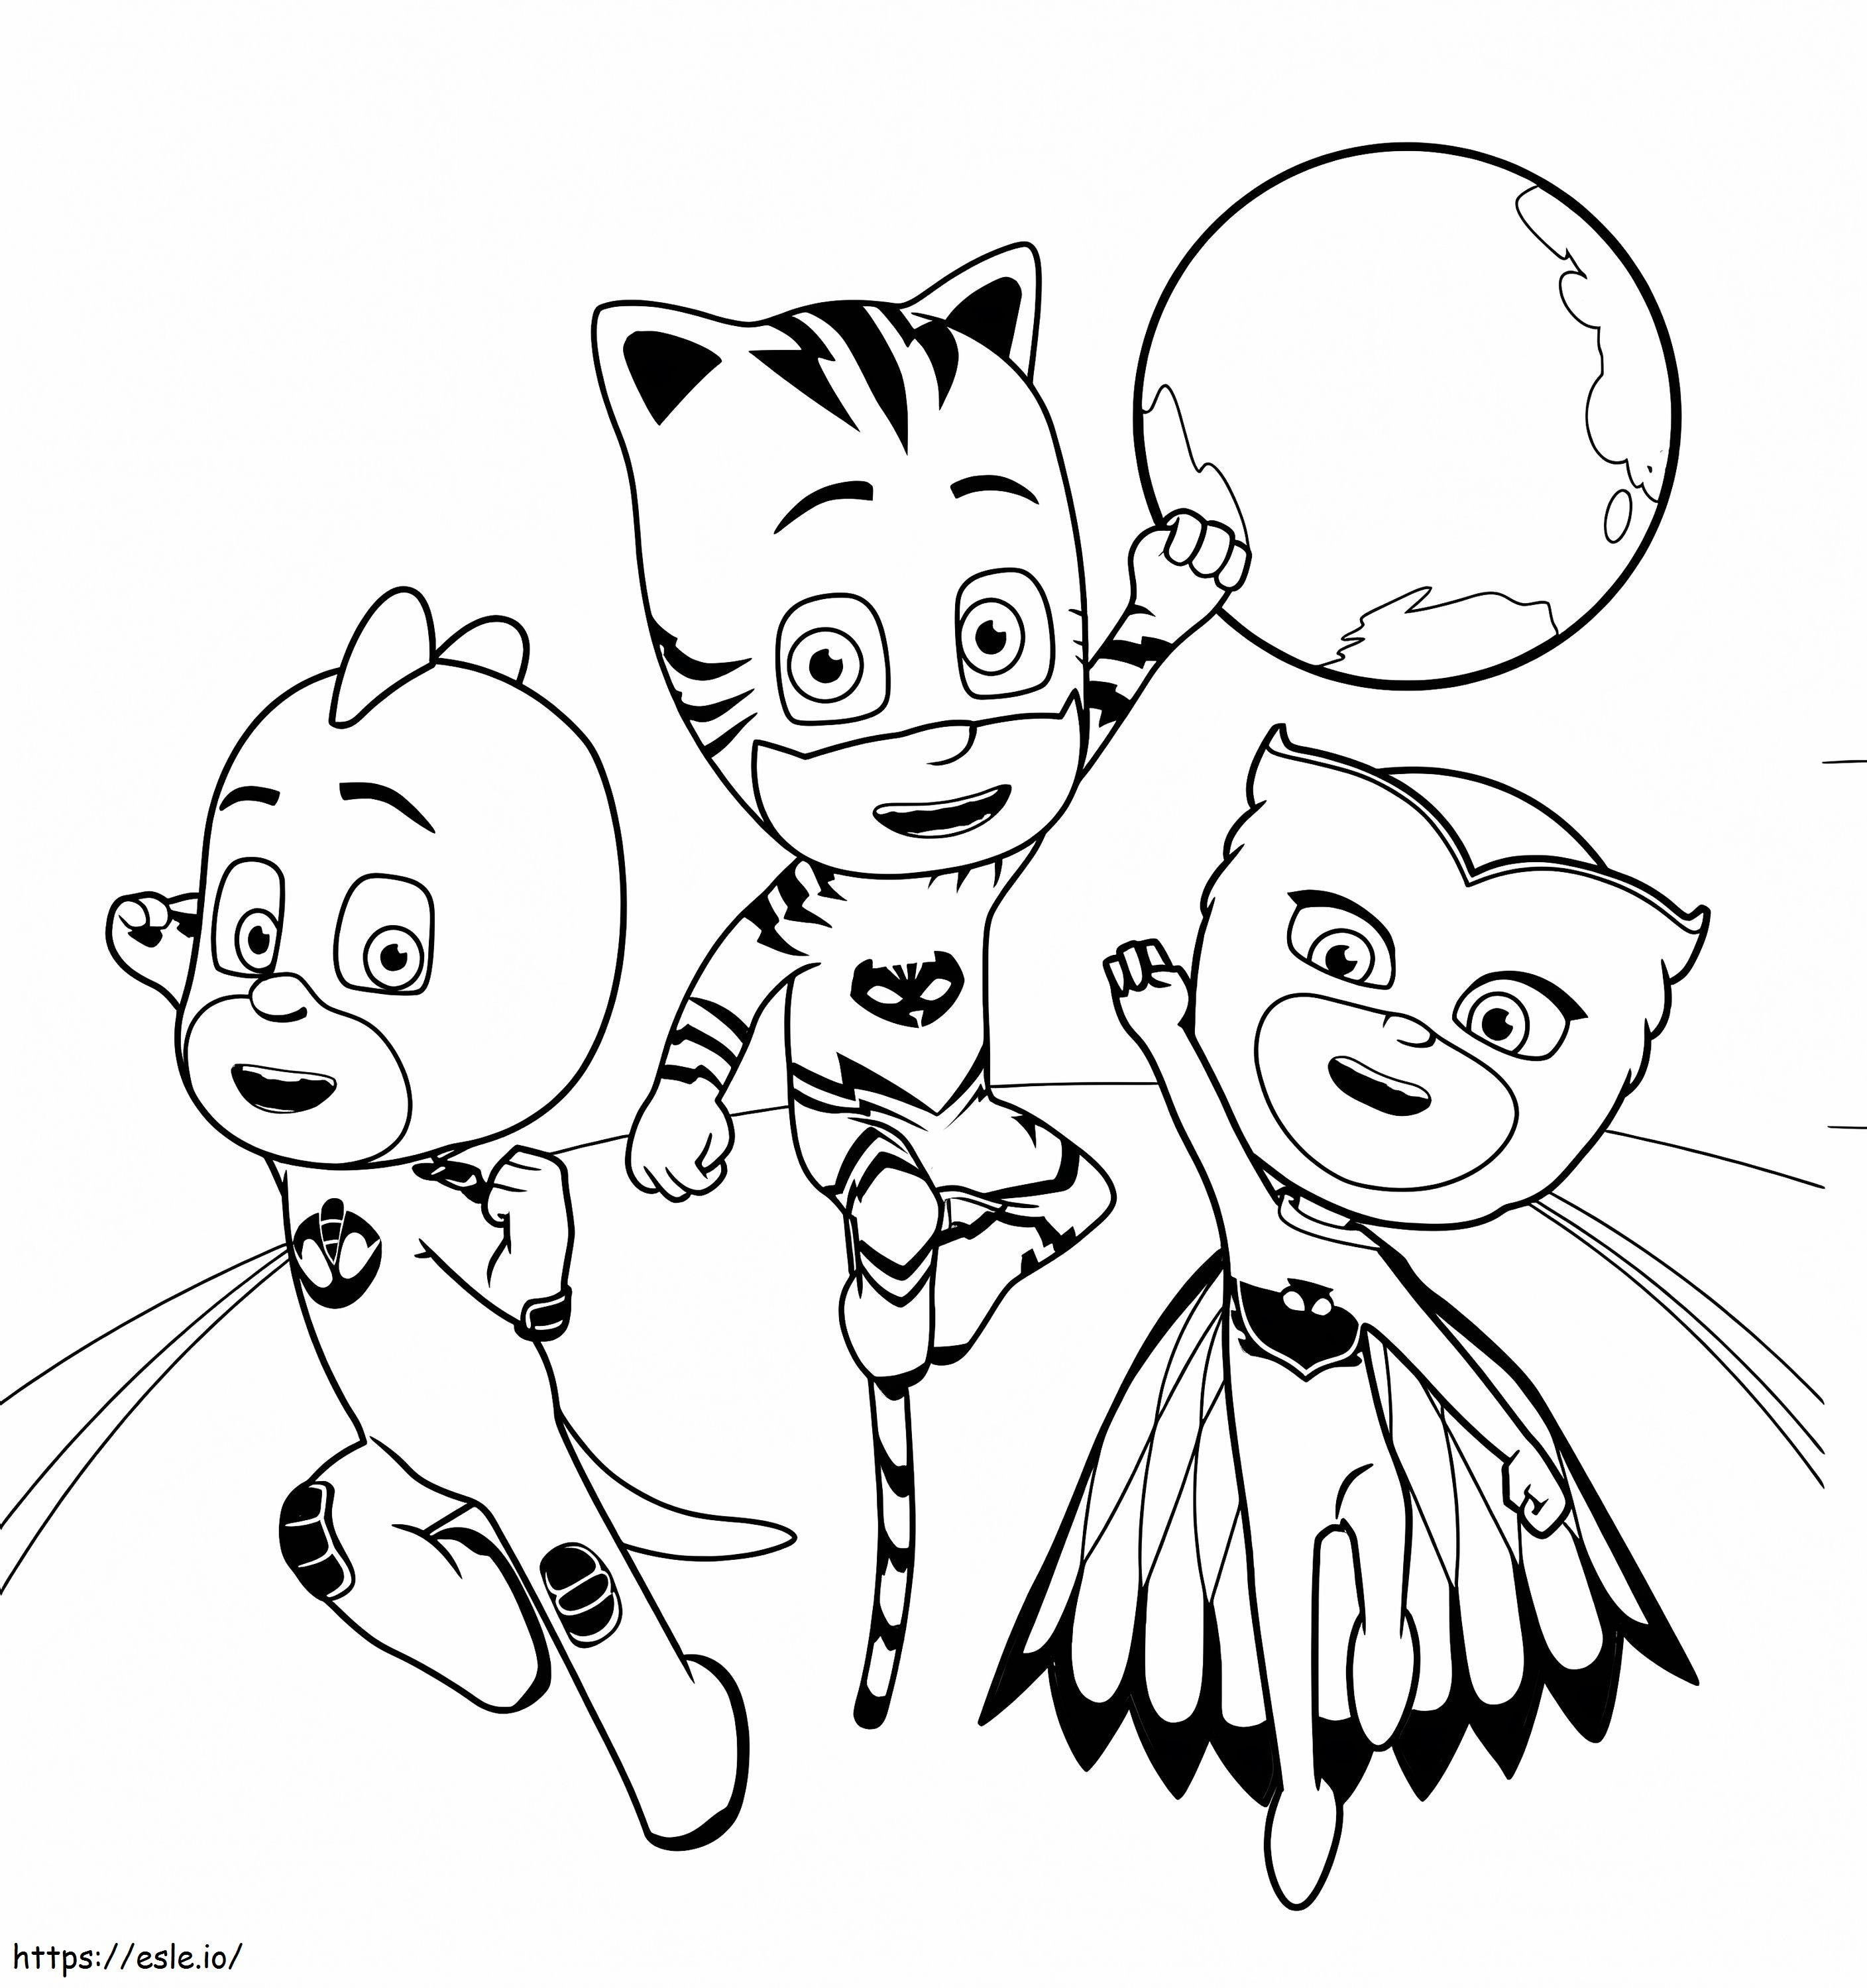 PJ Masks Save The Day coloring page